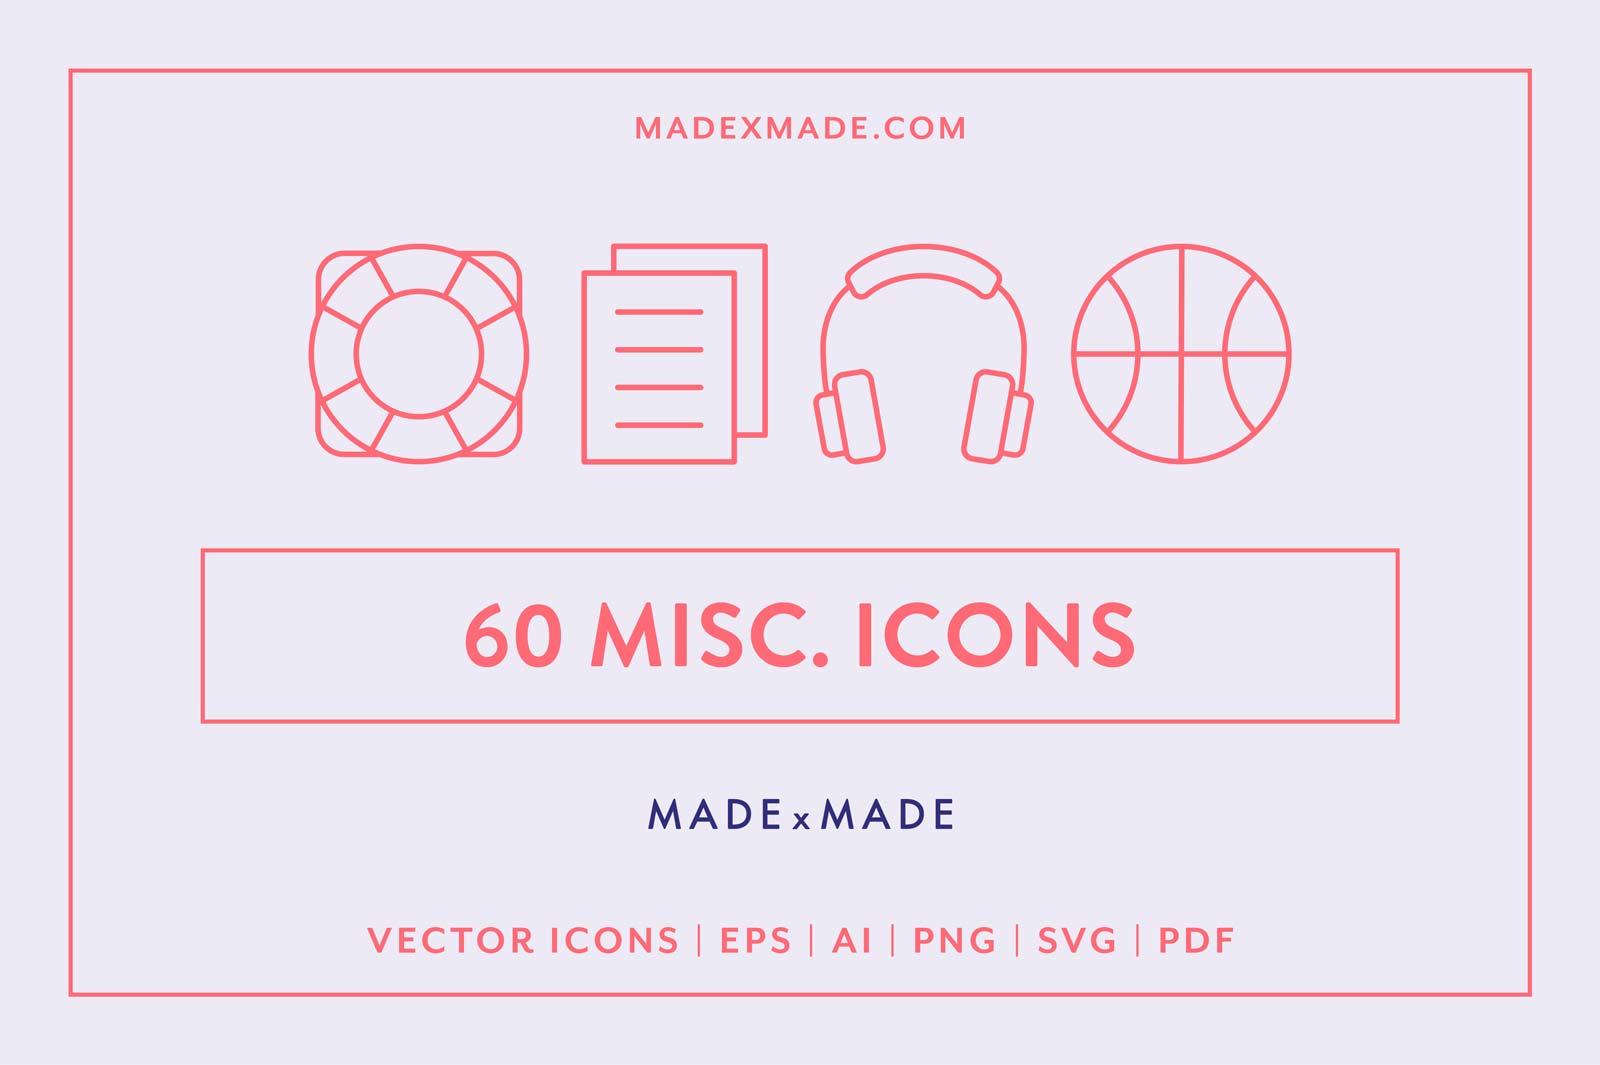 made x made icons miscellaneous